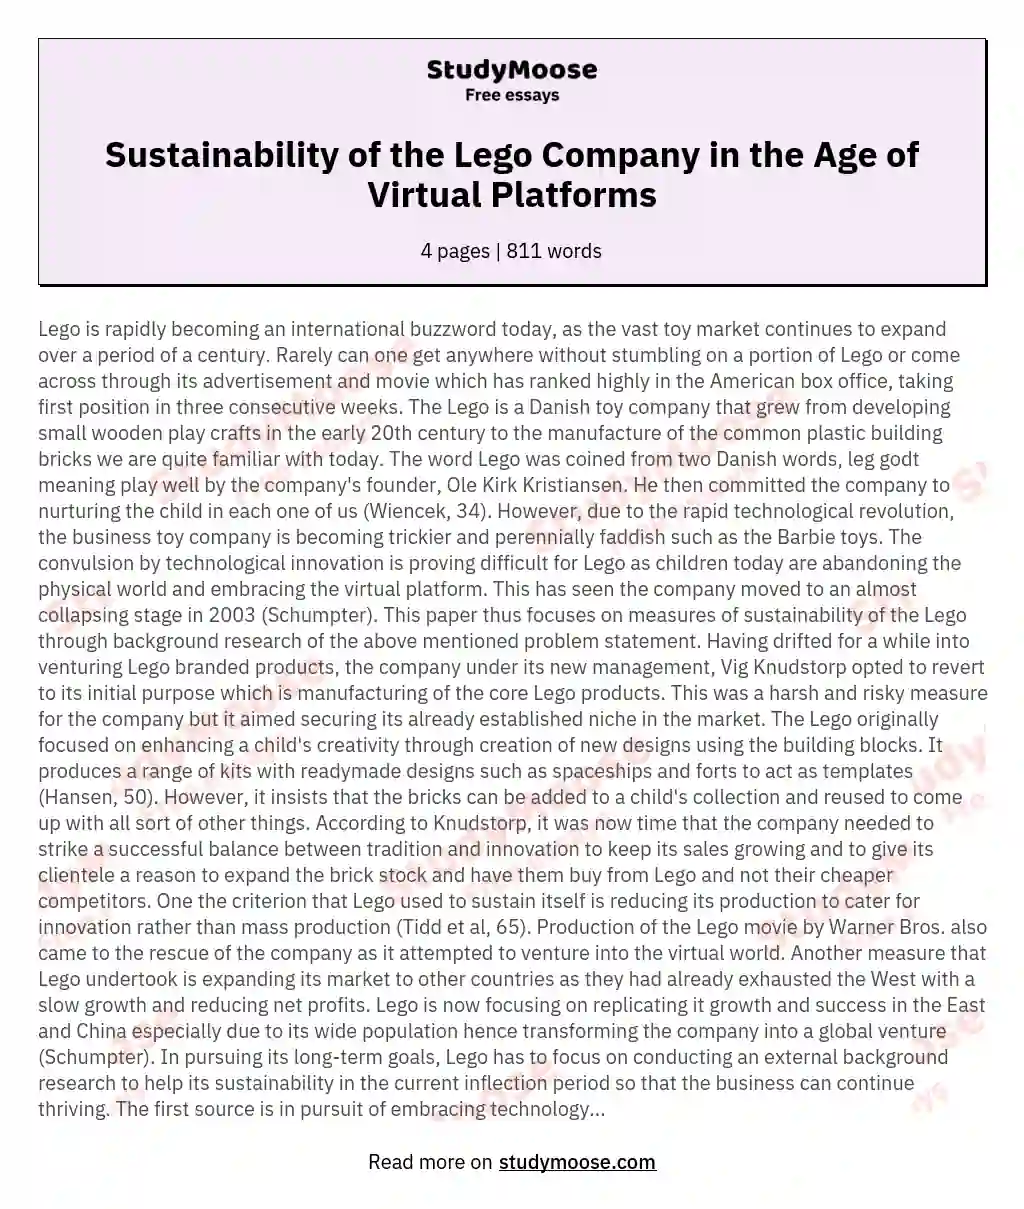 Sustainability of the Lego Company in the Age of Virtual Platforms essay